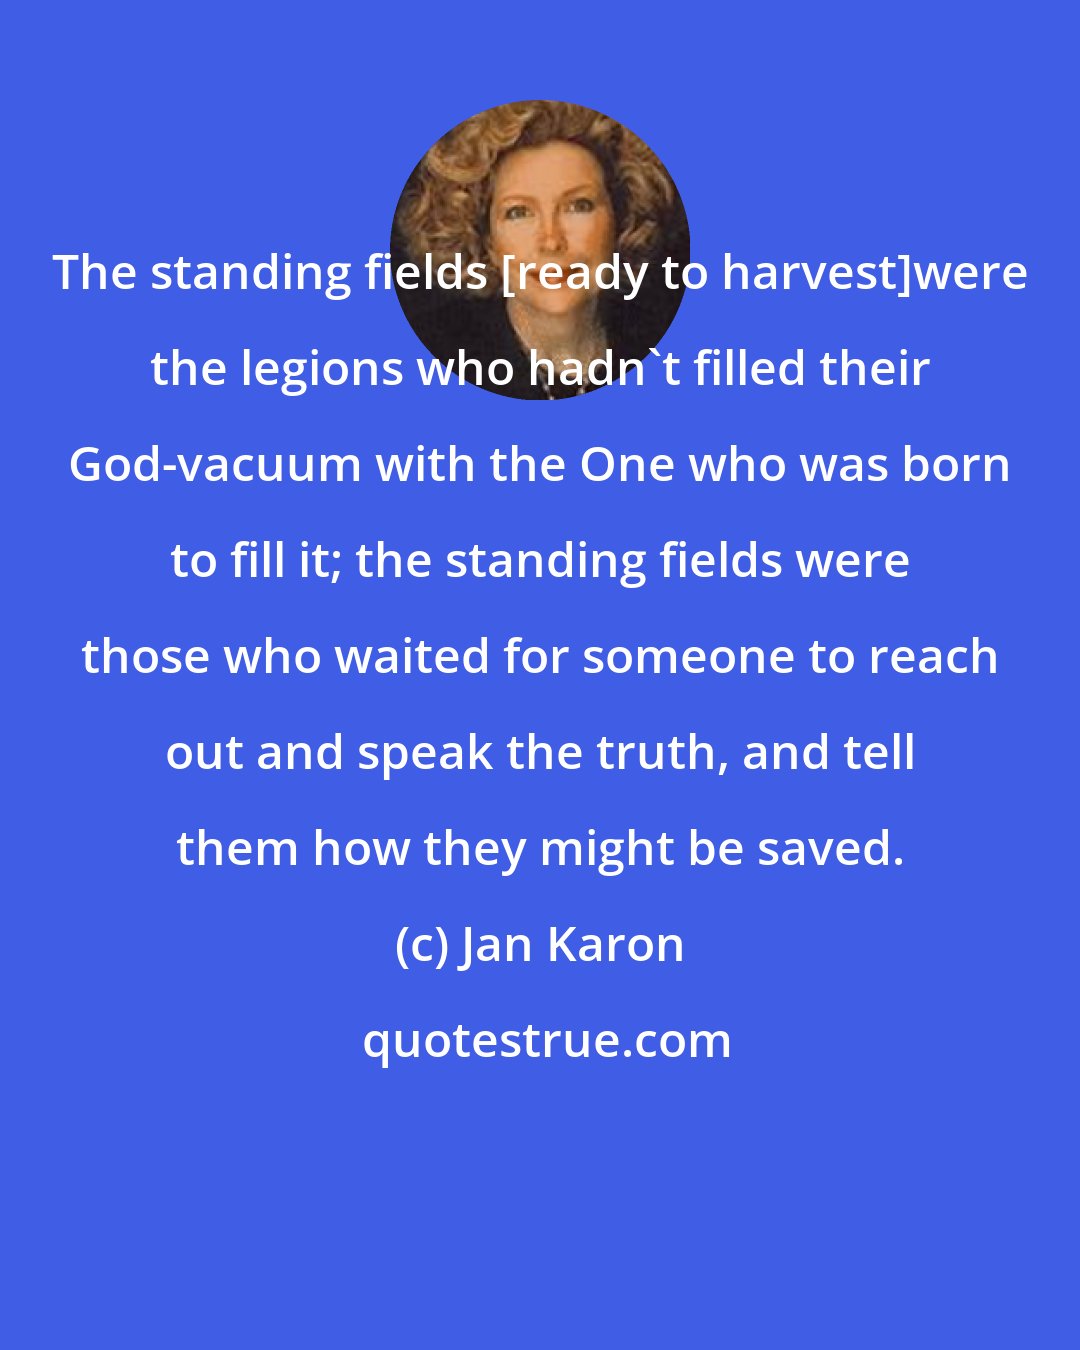 Jan Karon: The standing fields [ready to harvest]were the legions who hadn't filled their God-vacuum with the One who was born to fill it; the standing fields were those who waited for someone to reach out and speak the truth, and tell them how they might be saved.